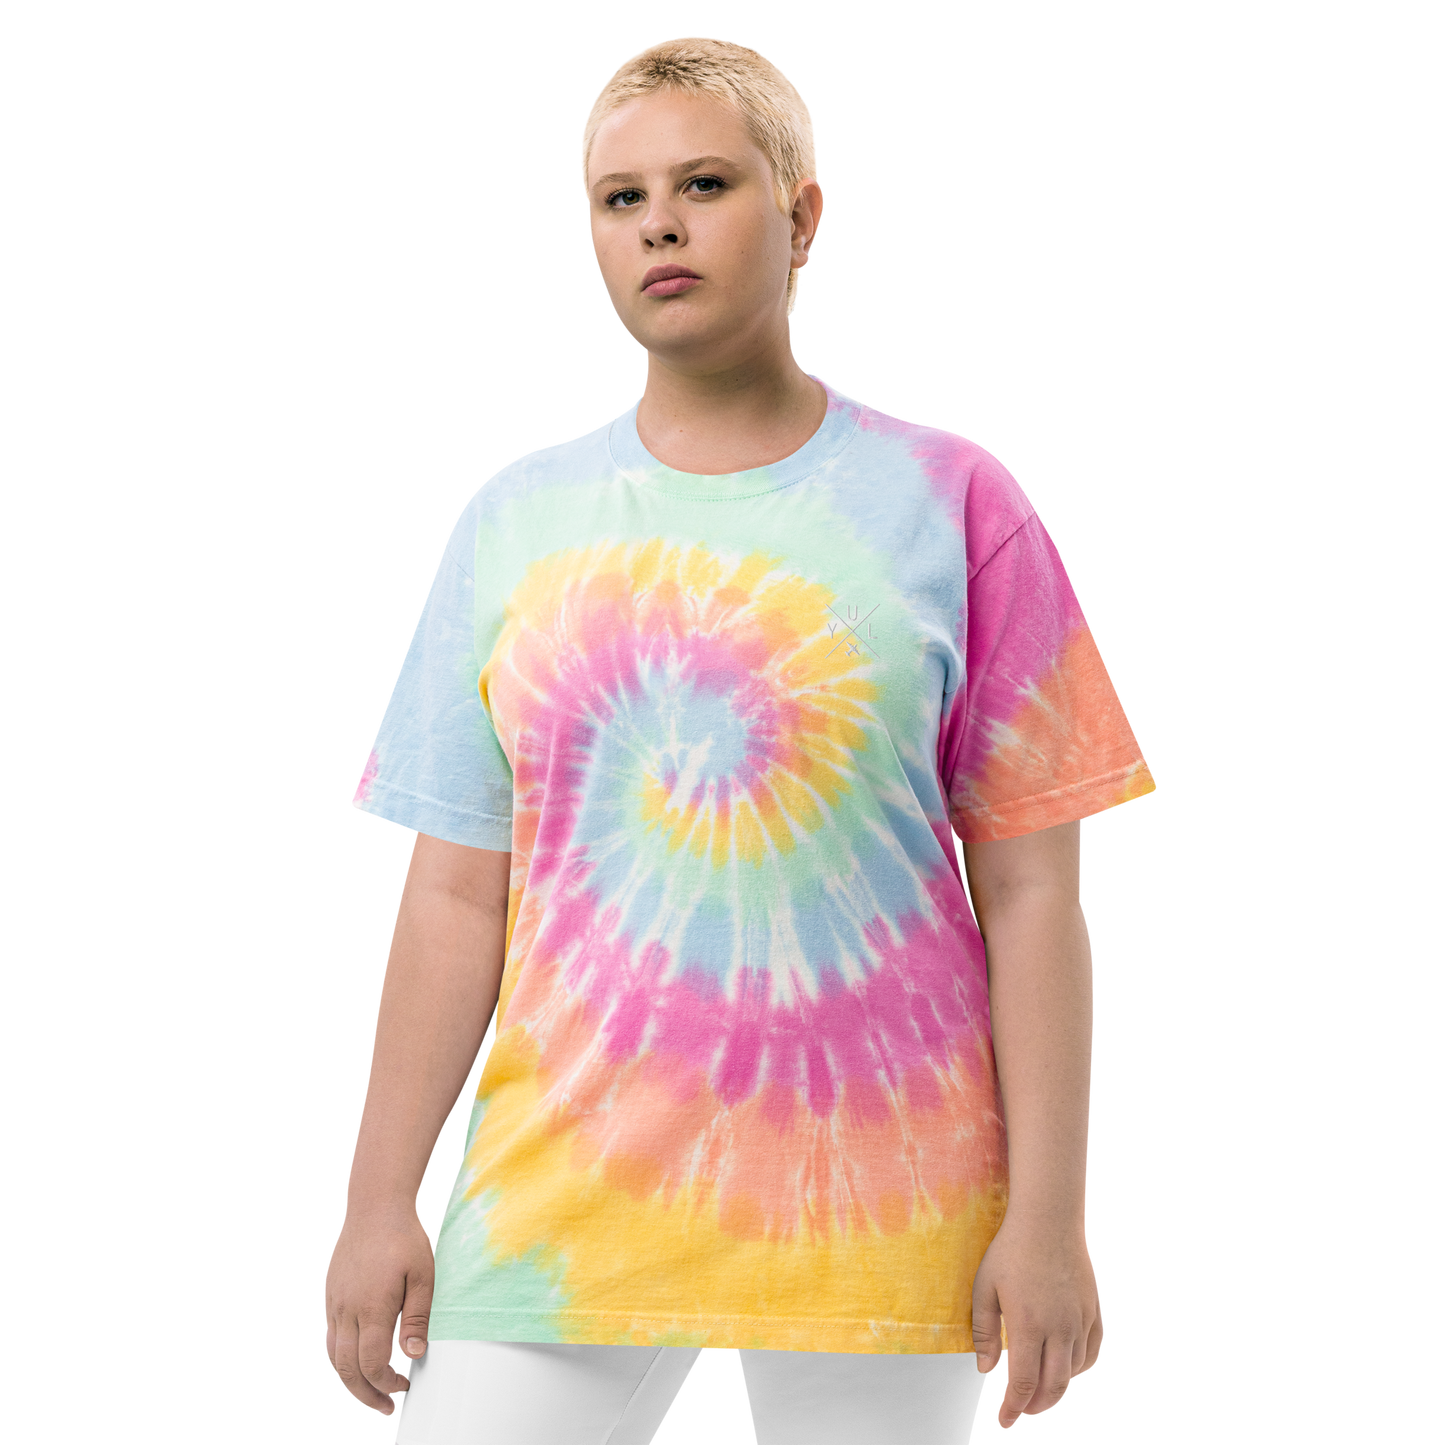 YHM Designs - YUL Montreal Oversized Tie-Dye T-Shirt - Crossed-X Design with Airport Code and Vintage Propliner - White Embroidery - Image 11